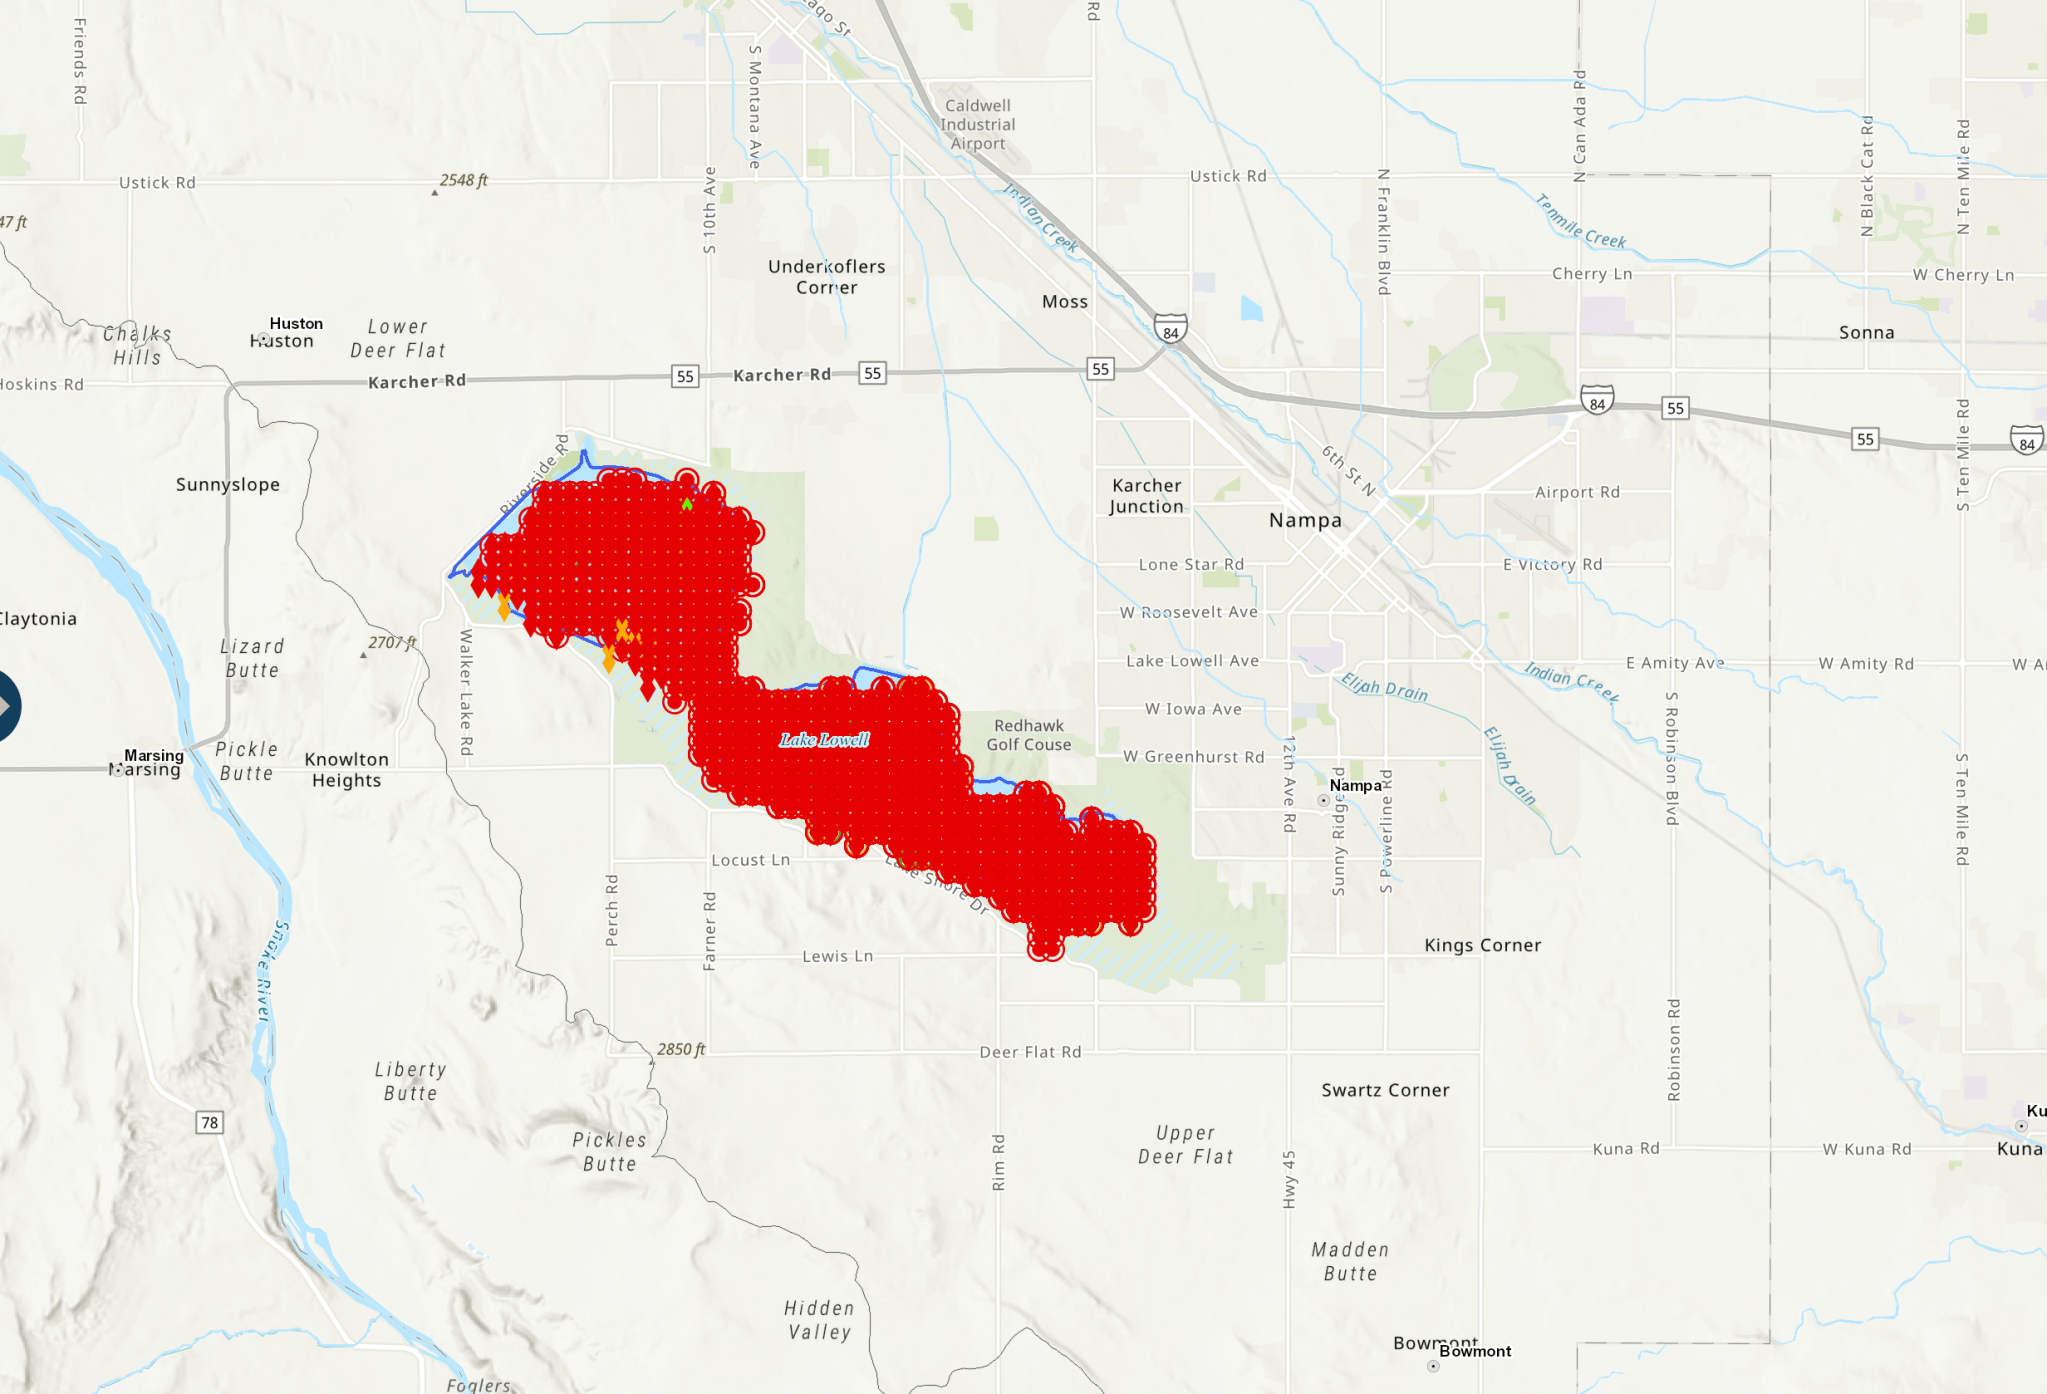 A map of a small lake in Idaho, with bright red dots showing where a cyanobacteria bloom has reached concentration levels that are dangerous to human health. A few small orange and green icons are visible near the lake's edges, indicating areas of lower concentration. The lake is shaped like a thick squiggly line roughly horizontal. The background map is tan and has text and lines showing the nearby towns of Karcher Junction, Nampa, and Knowlton Heights.